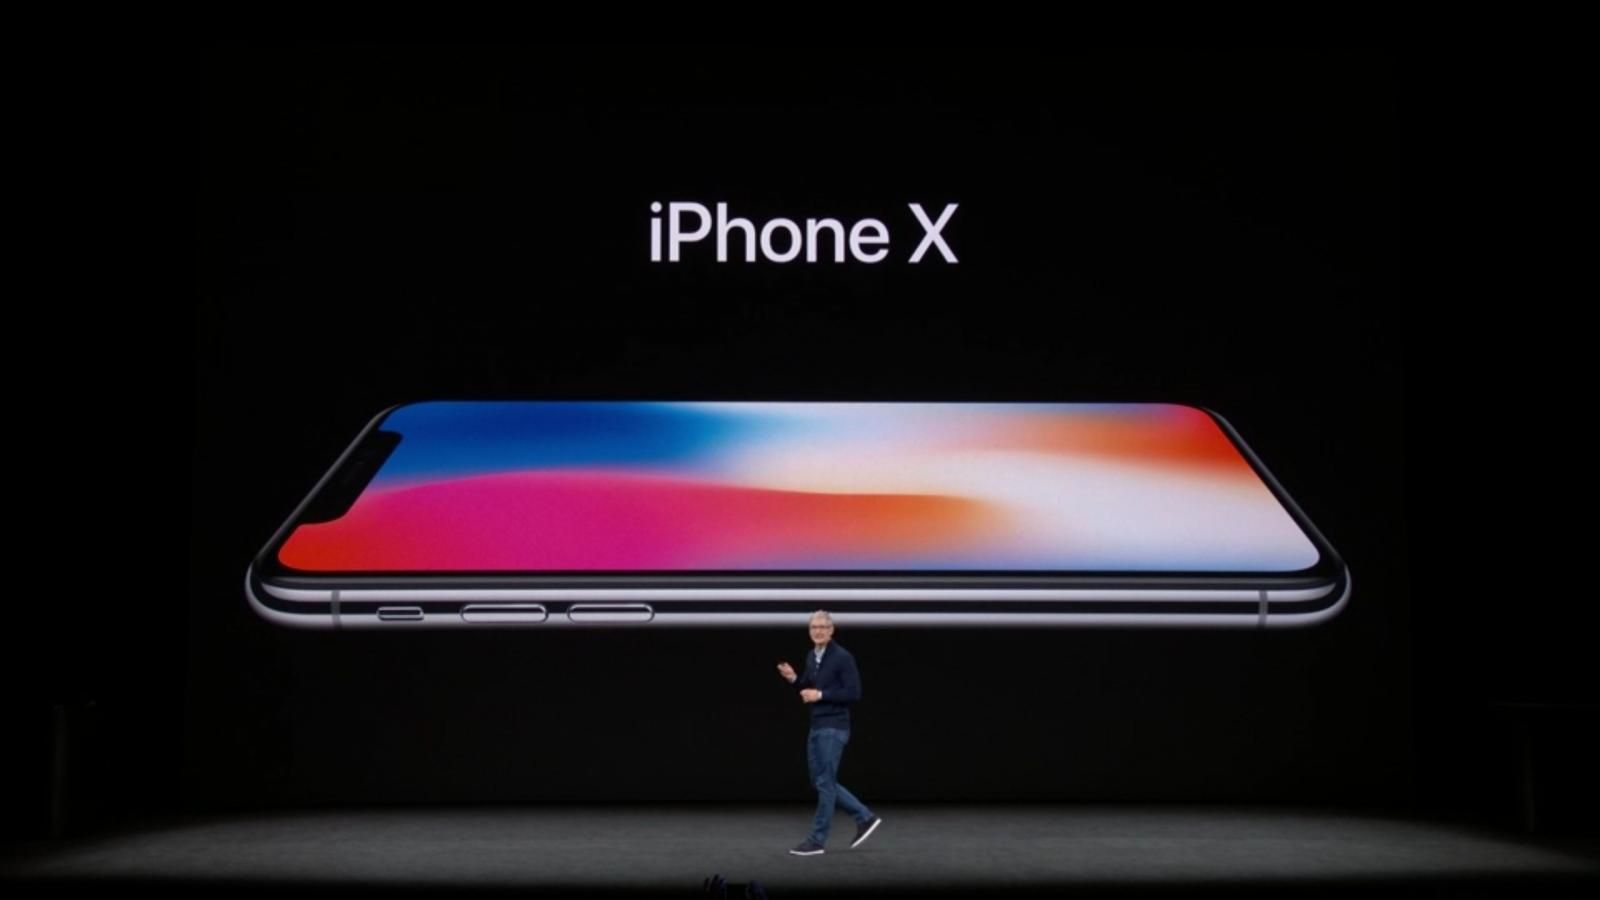 ‘All screen’ iPhone X arrives with OLED technology, Face ID and much more